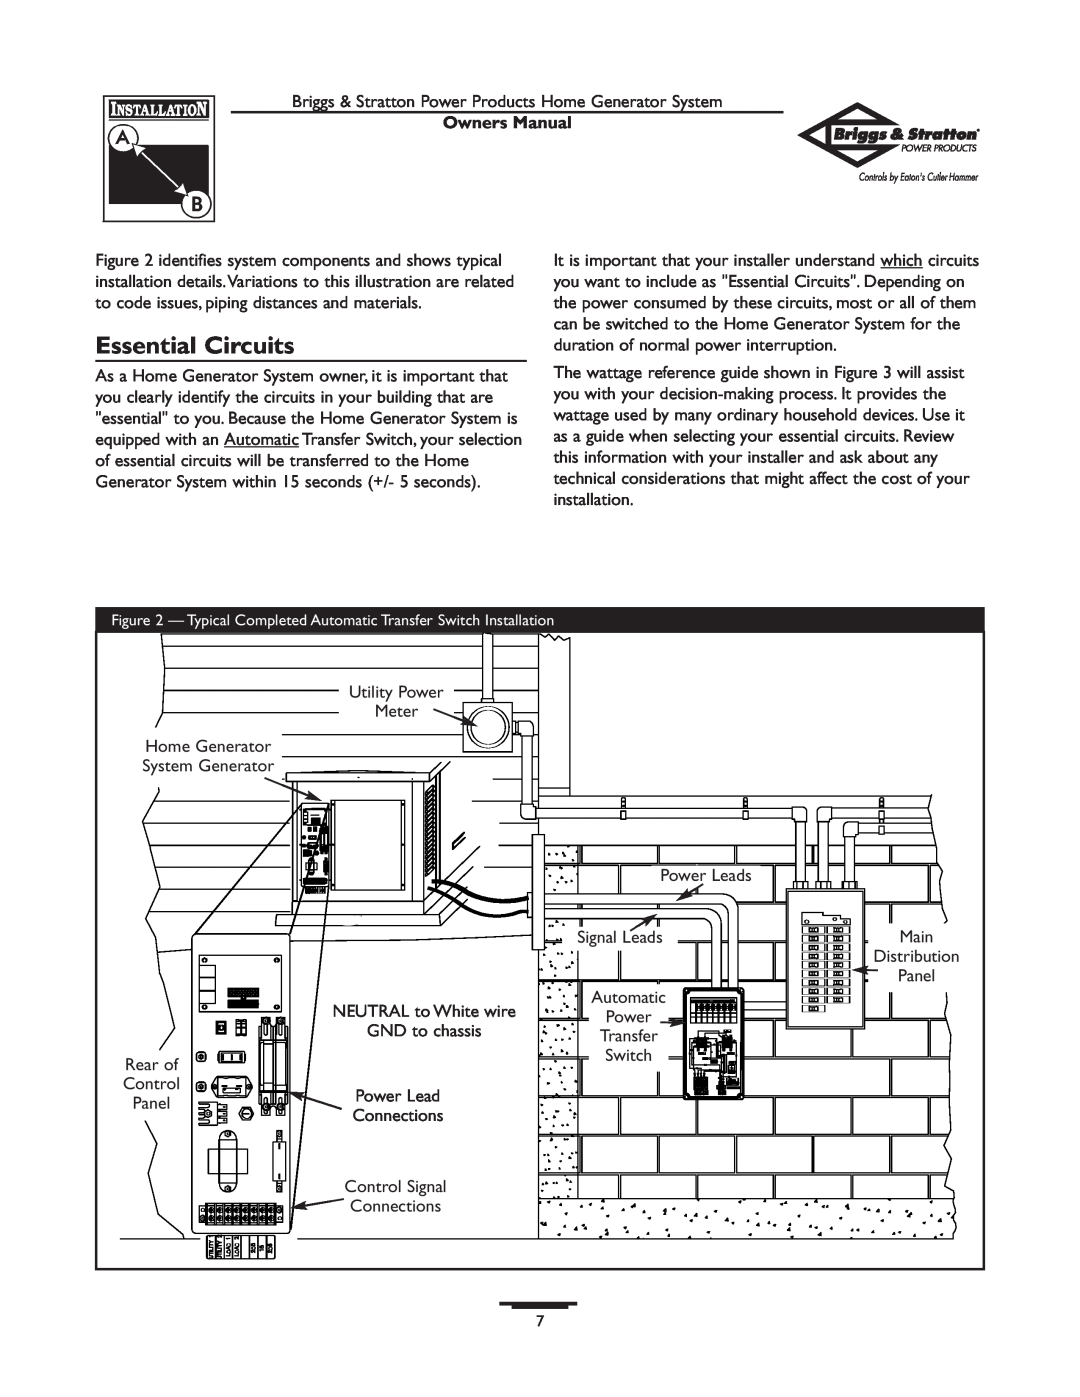 Briggs & Stratton 1679-0 owner manual Essential Circuits, Owners Manual 